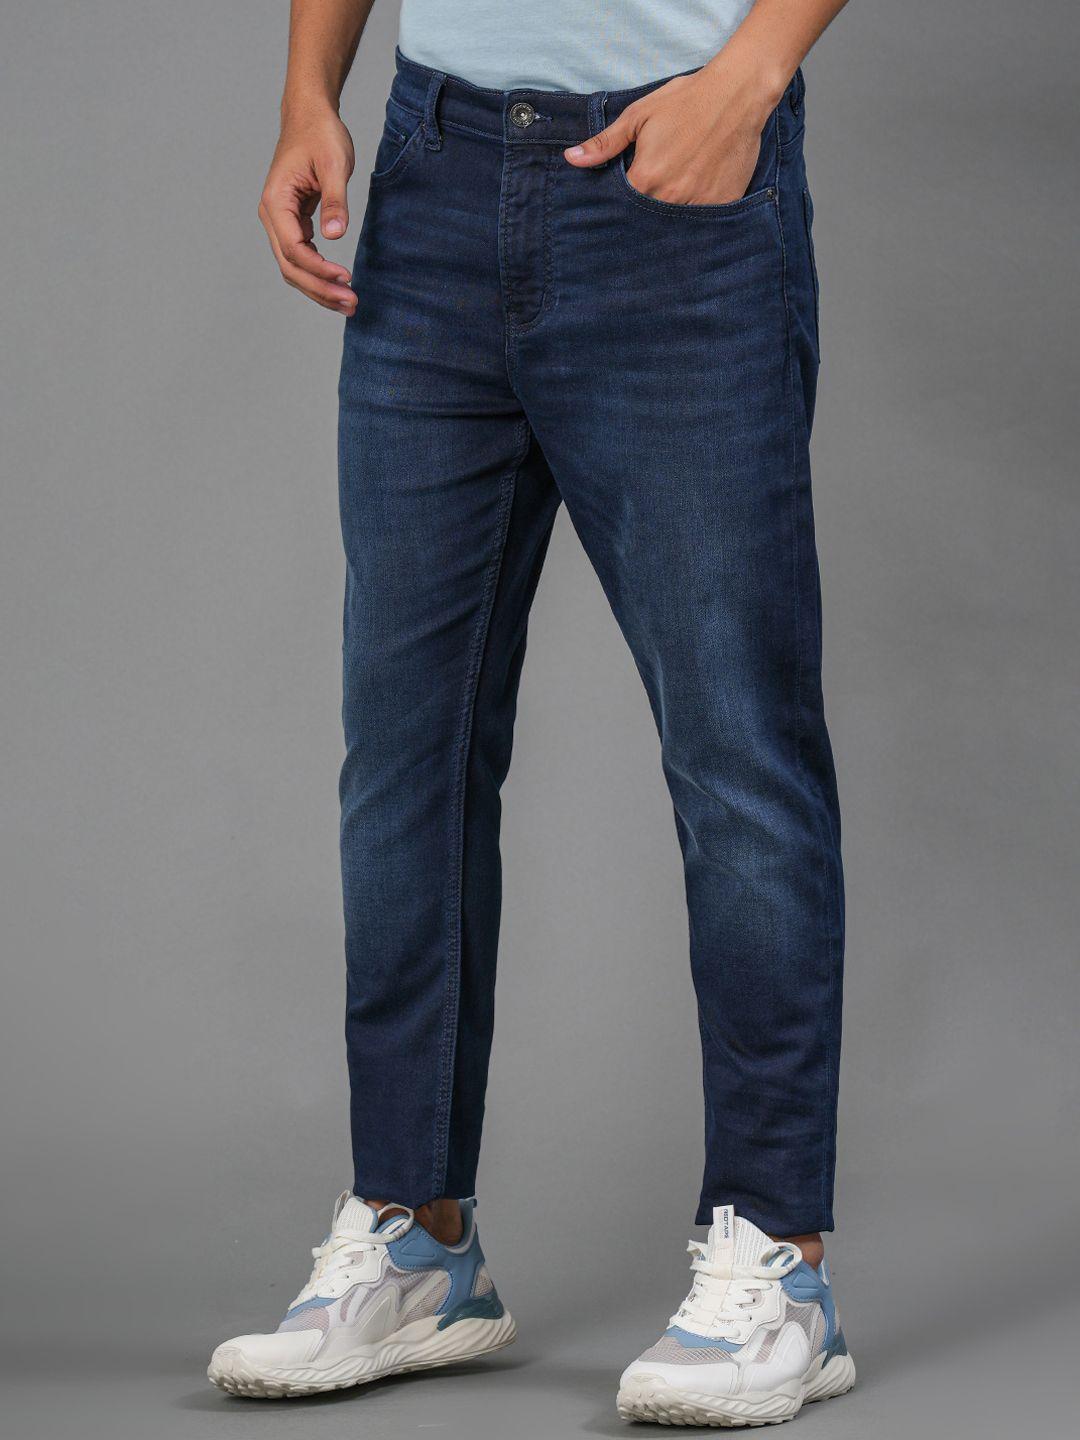 red tape men relaxed fit light fade stretchable cotton jeans